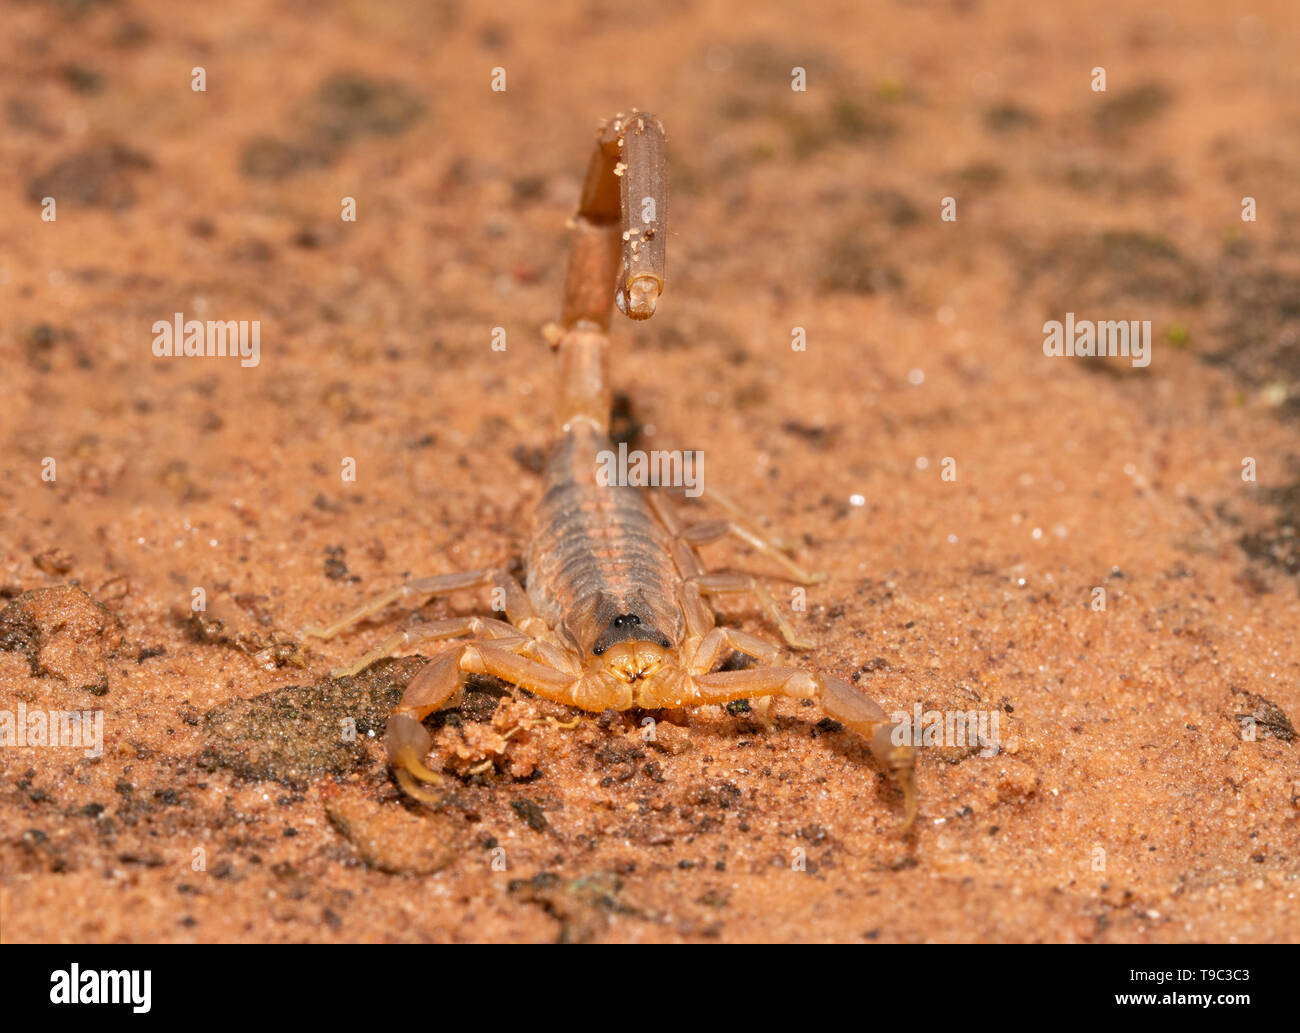 Front view of a Striped Bark Scorpion with his stinger raised over his back, ready for an attack Stock Photo